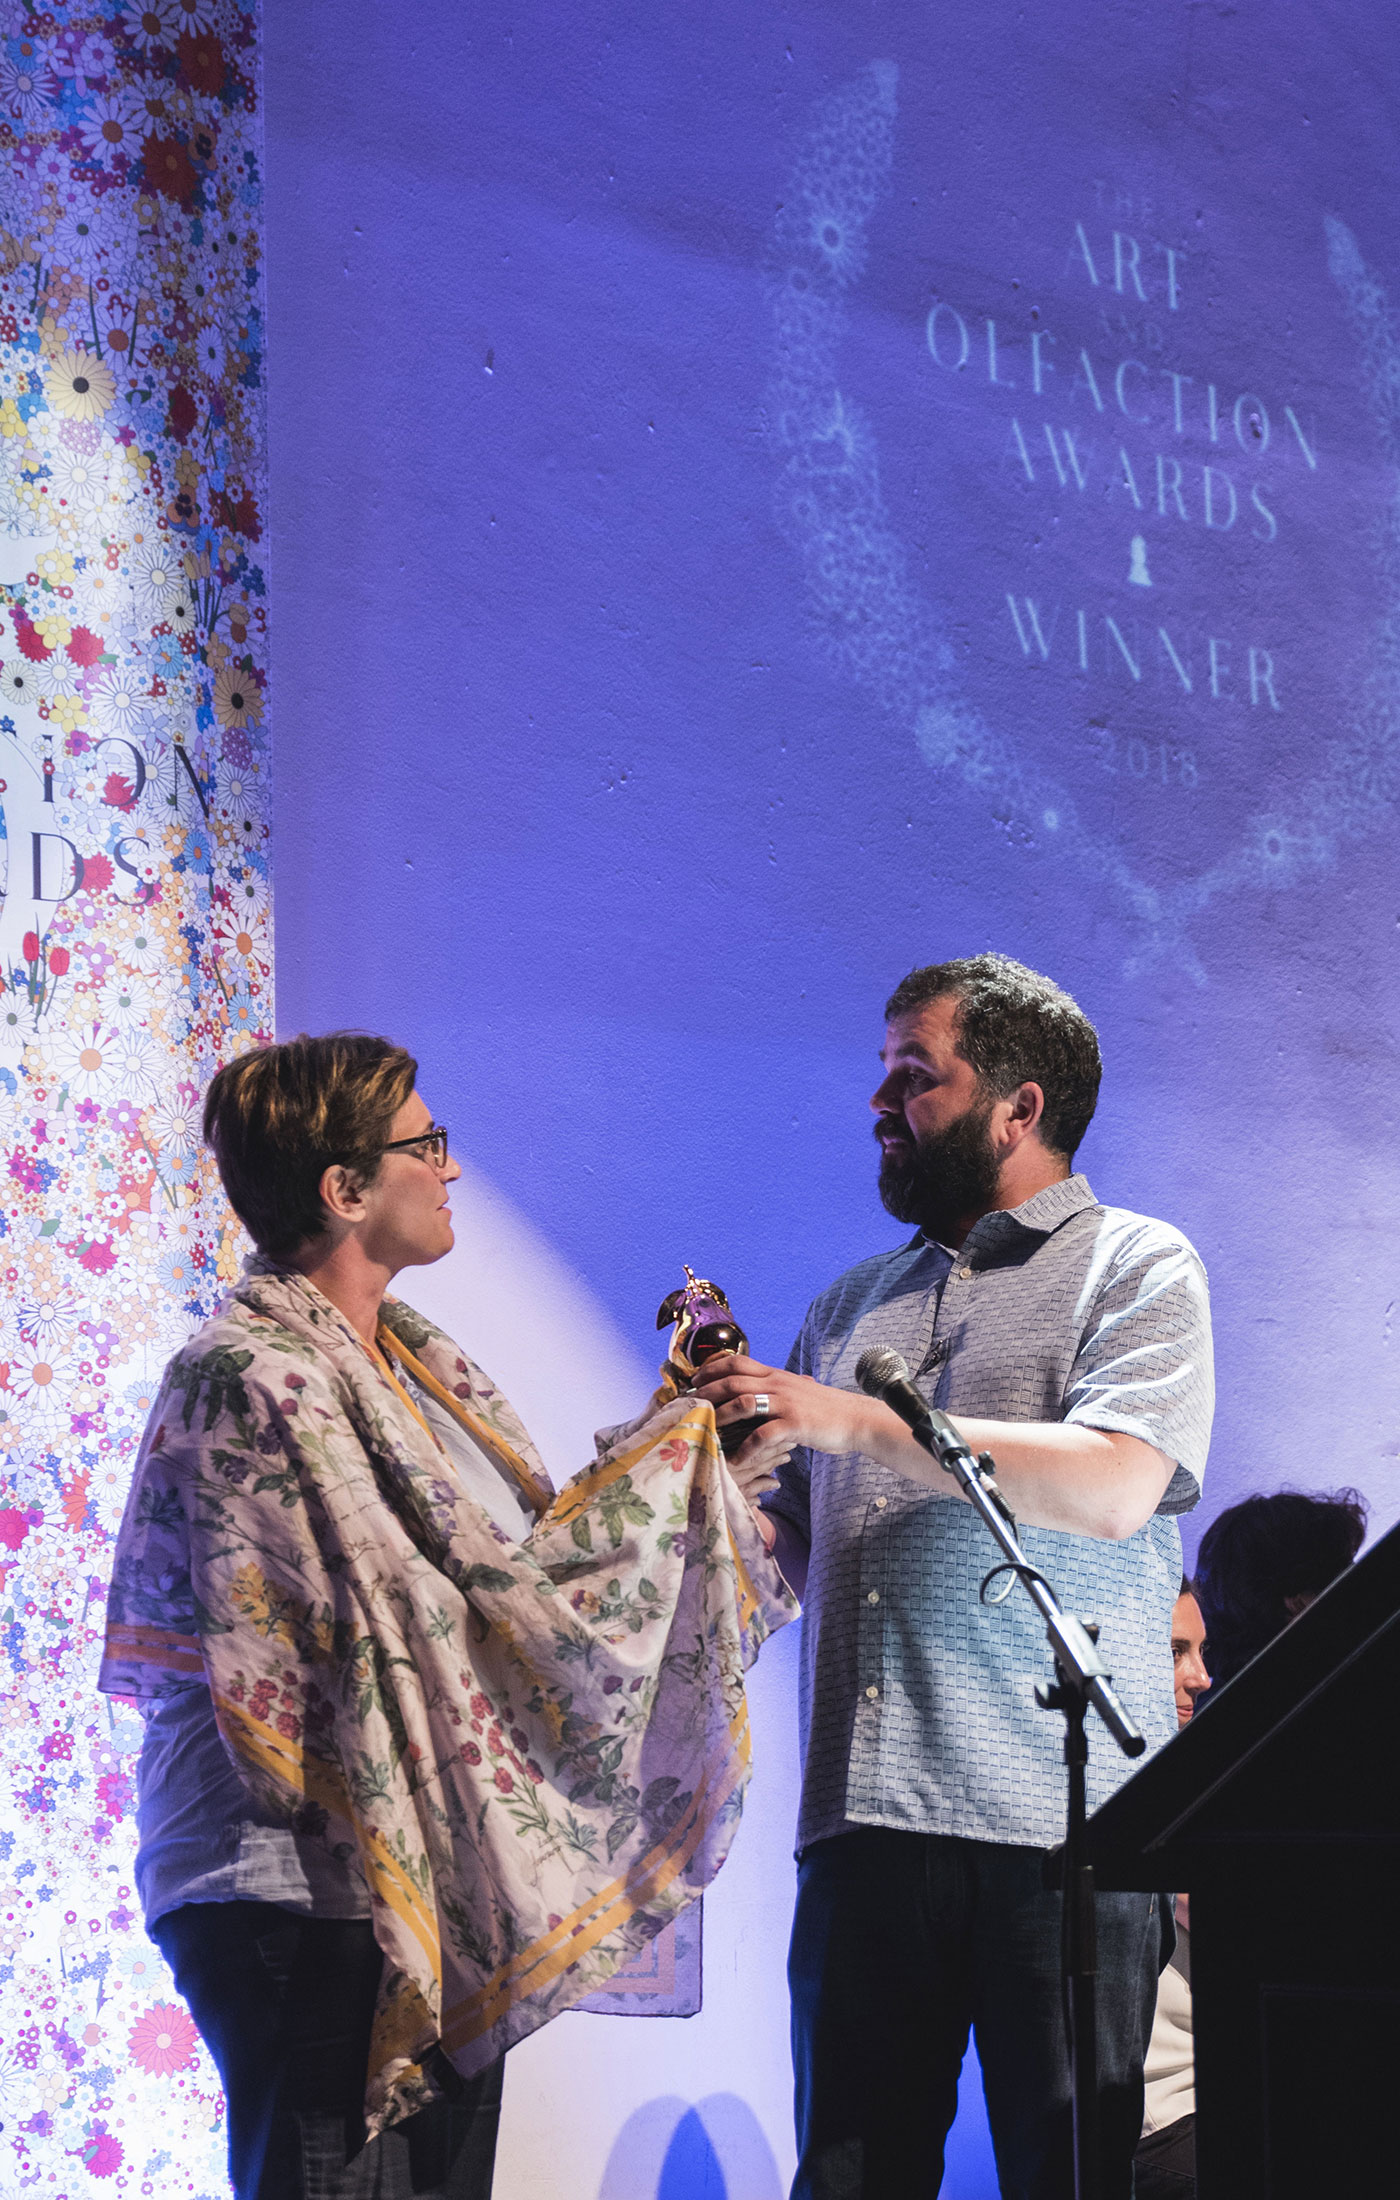 Virginie Roux, Dominique Brunel at The Art and Olfaction Awards, Photo by Marina Chichi